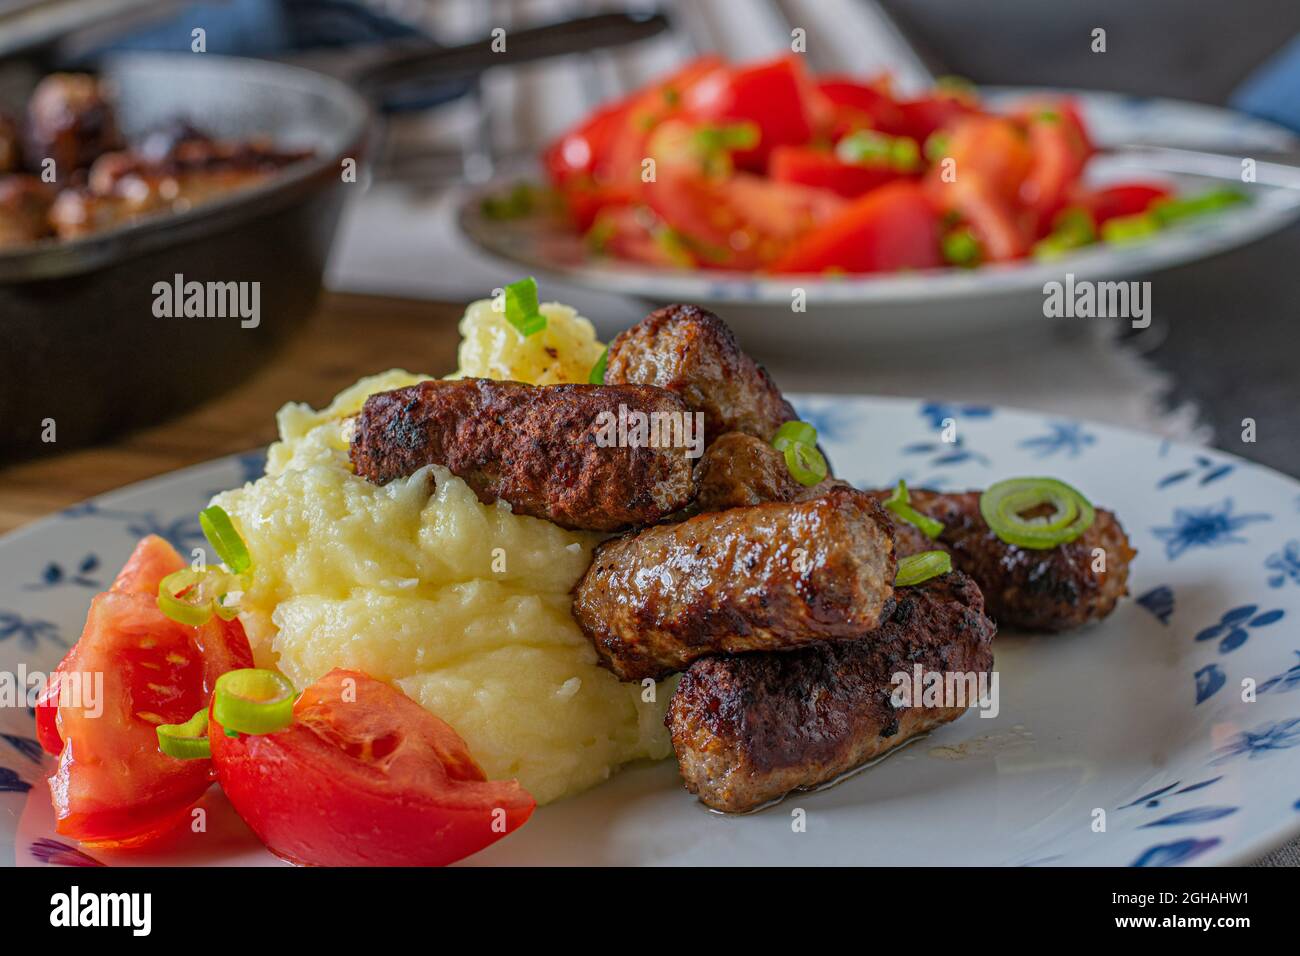 Cevapcici with mashed potatoes and tomato salad Stock Photo